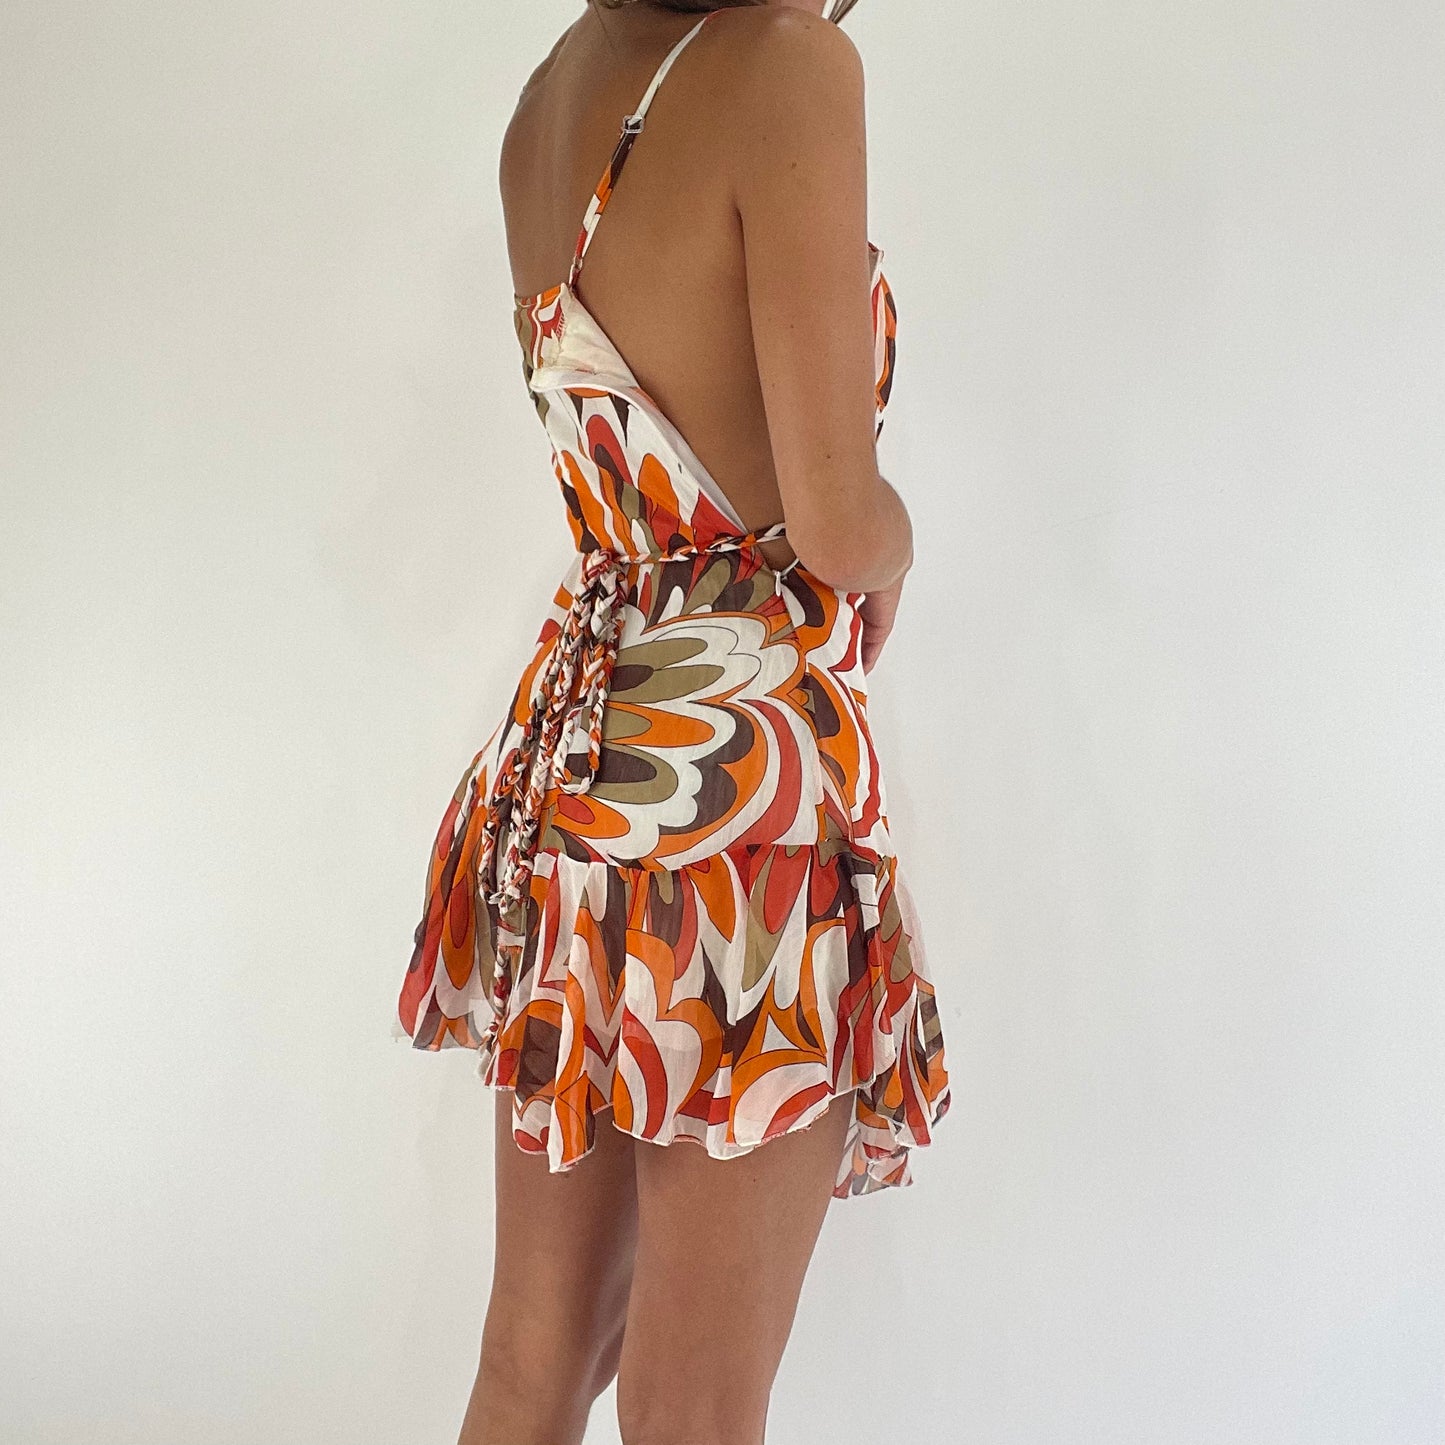 TROPICAL GIRL DROP | orange and brown patterned tie up dress - xs